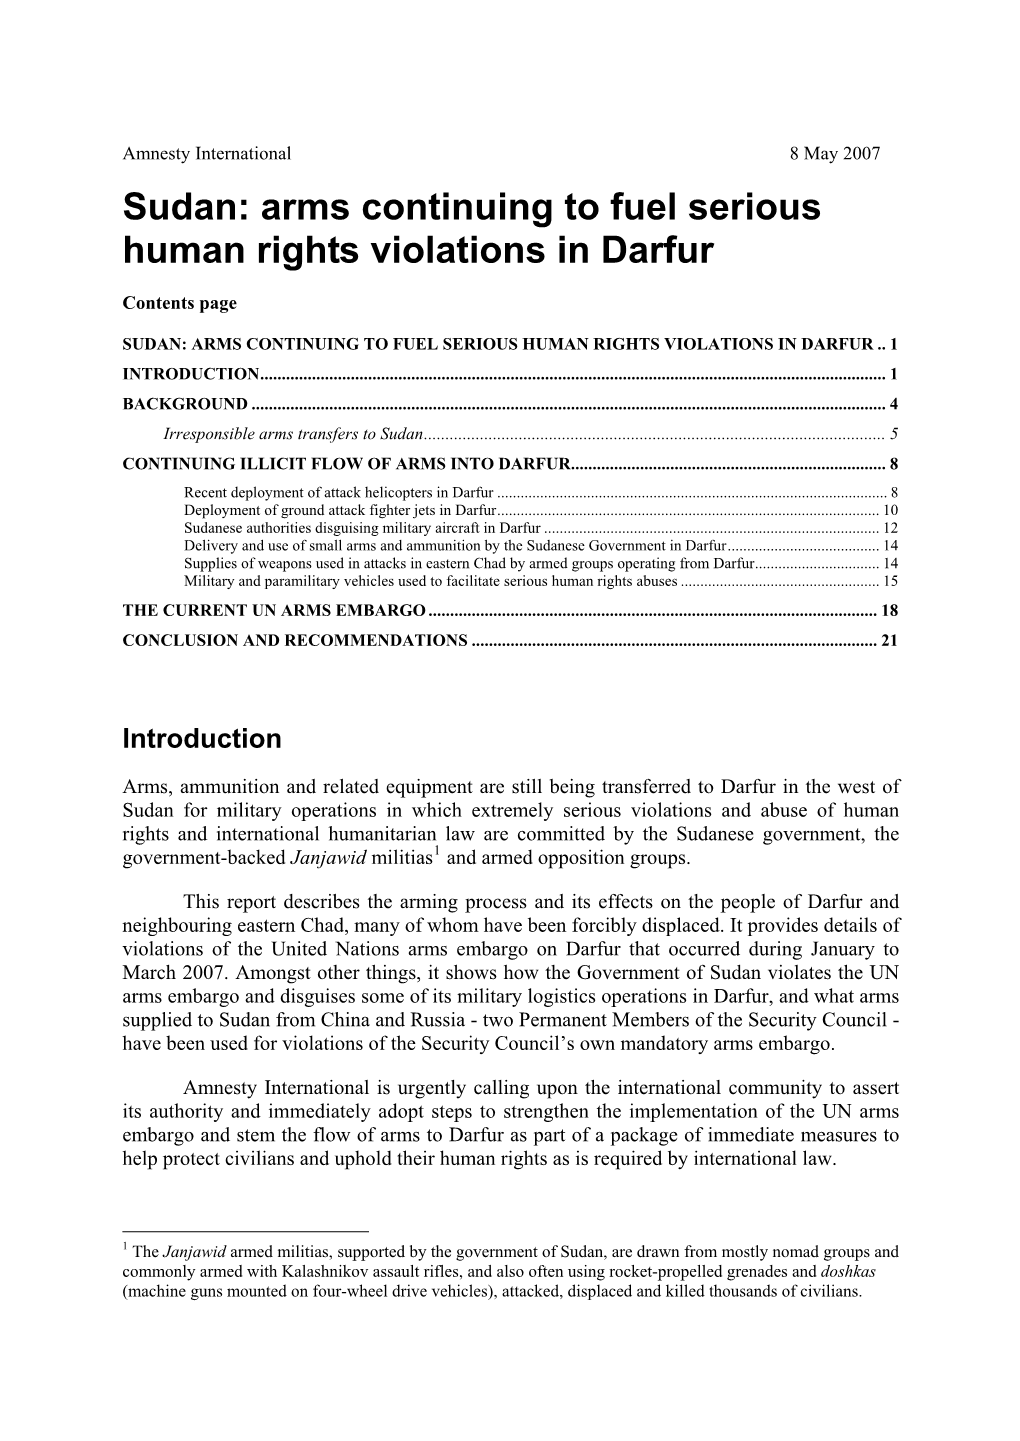 Sudan: Arms Continuing to Fuel Serious Human Rights Violations in Darfur